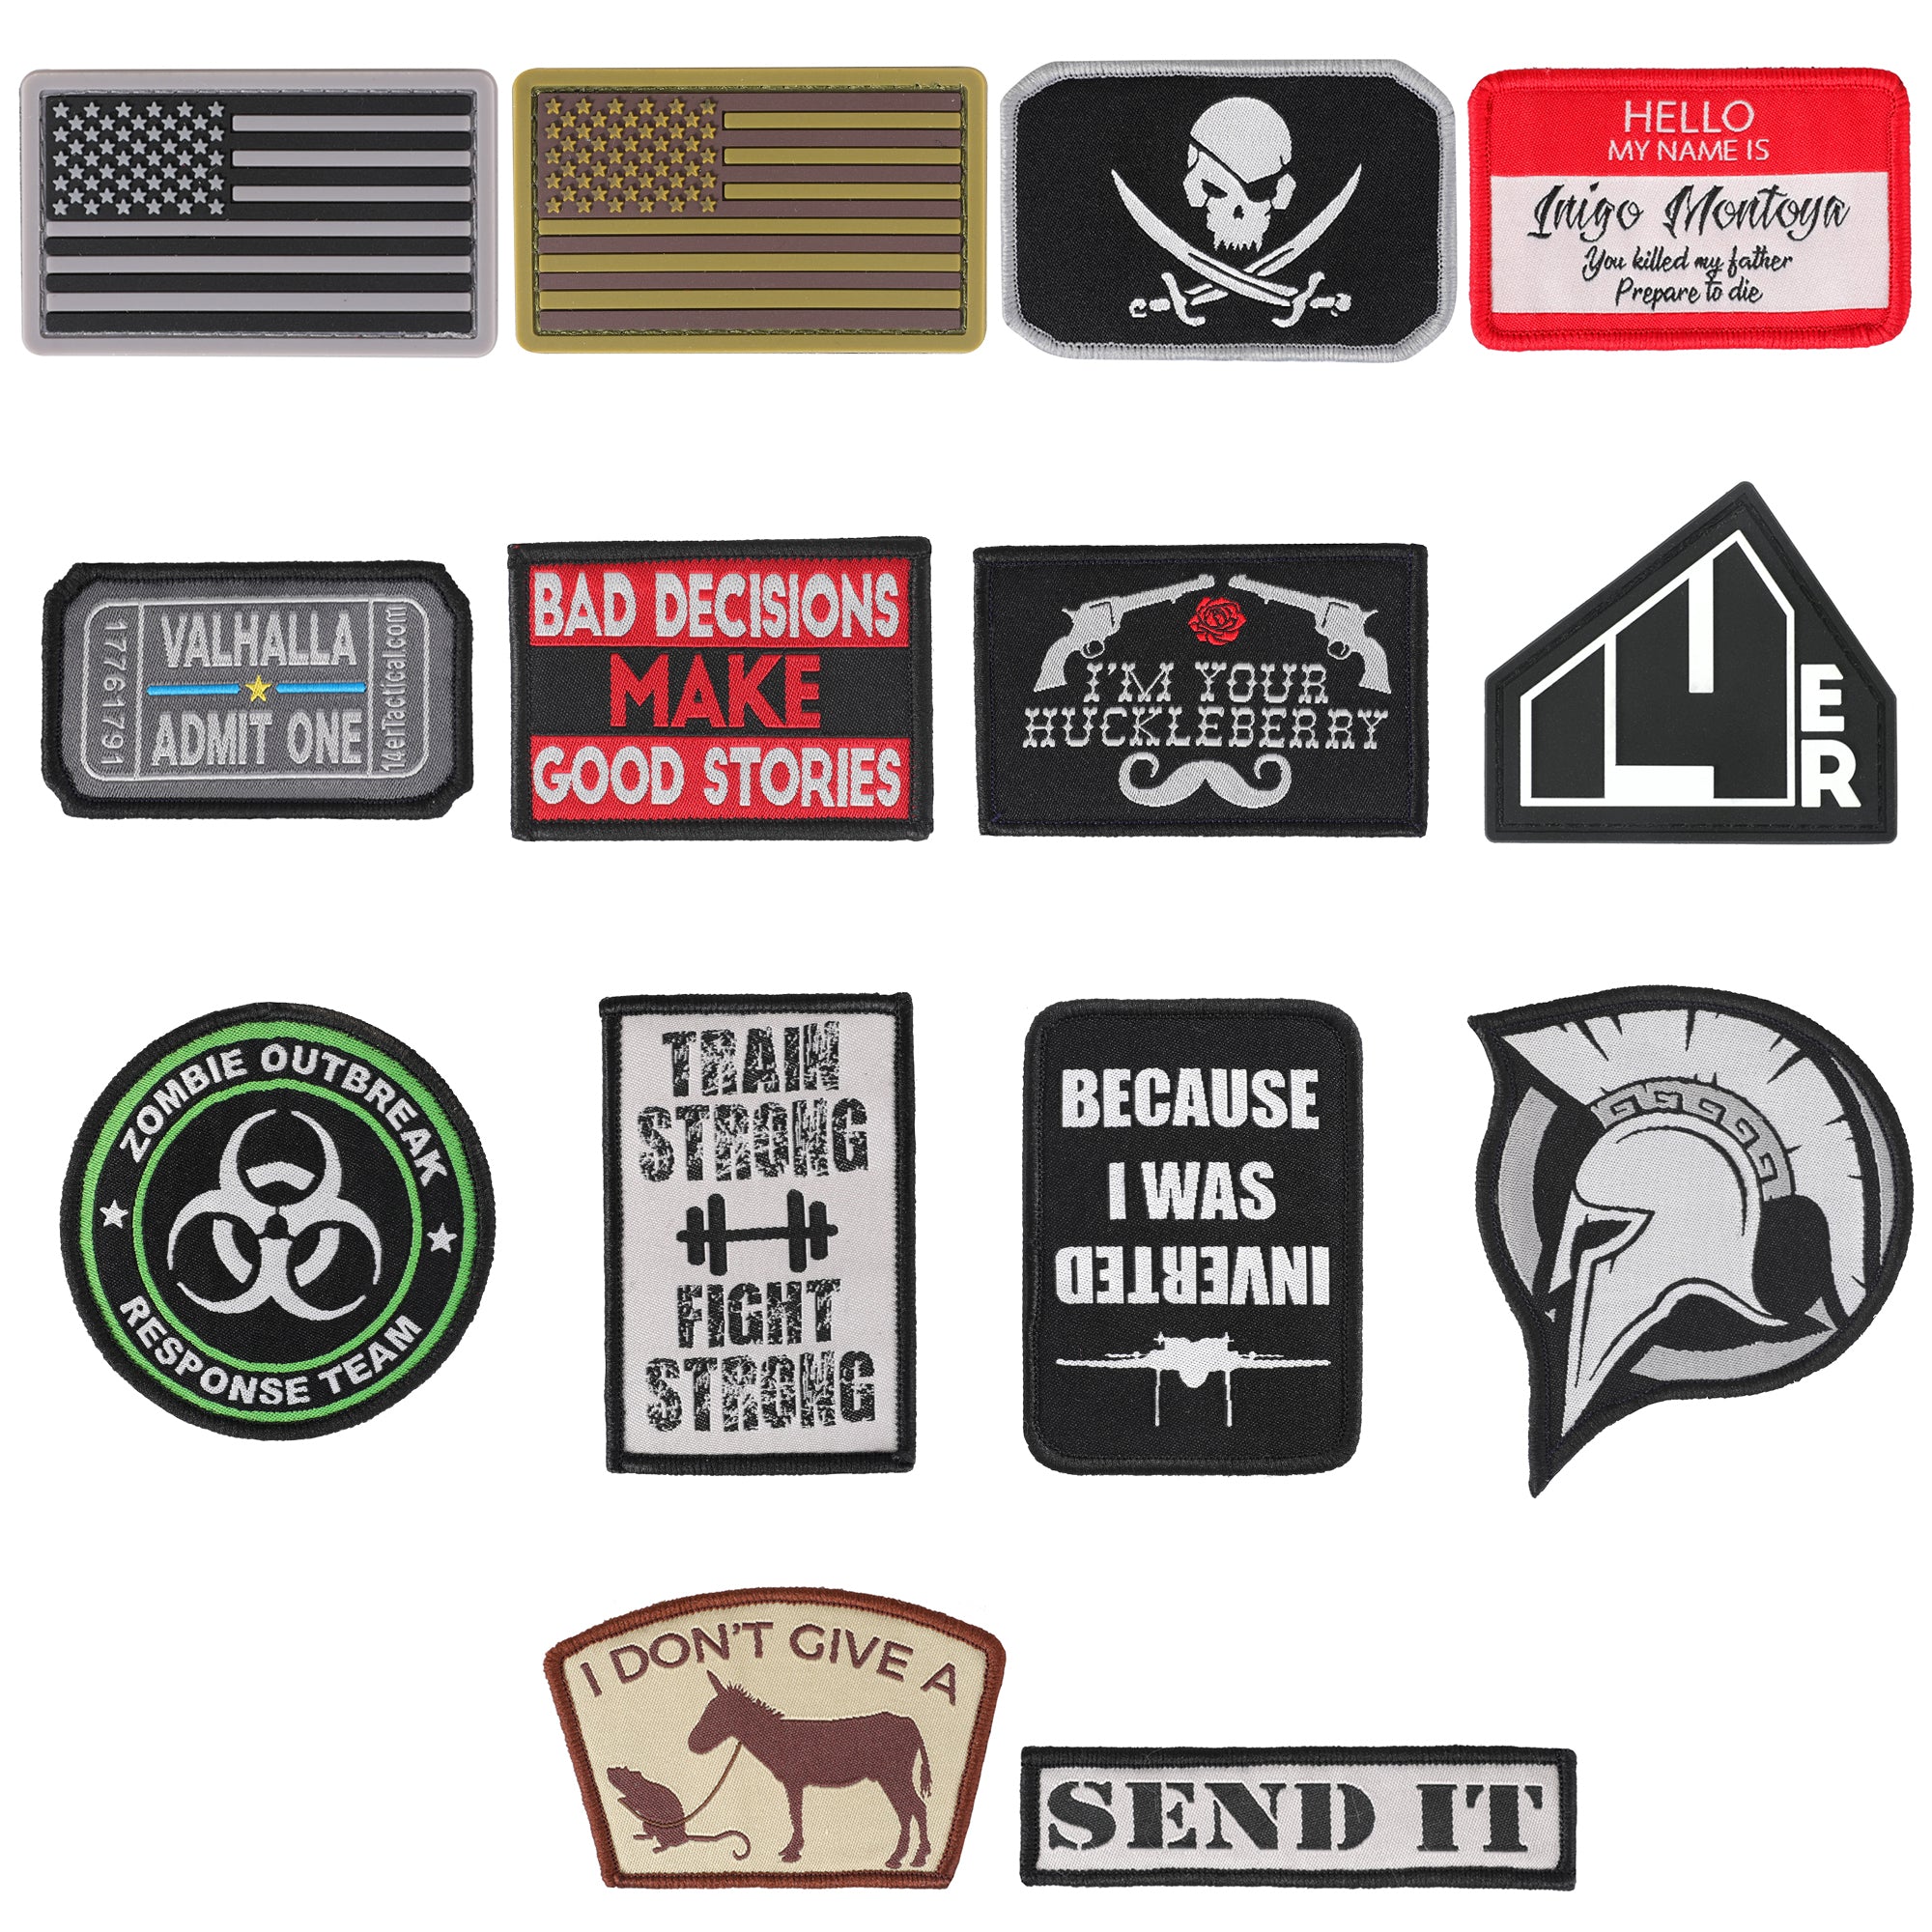 The patch wall must grow! : r/Patches